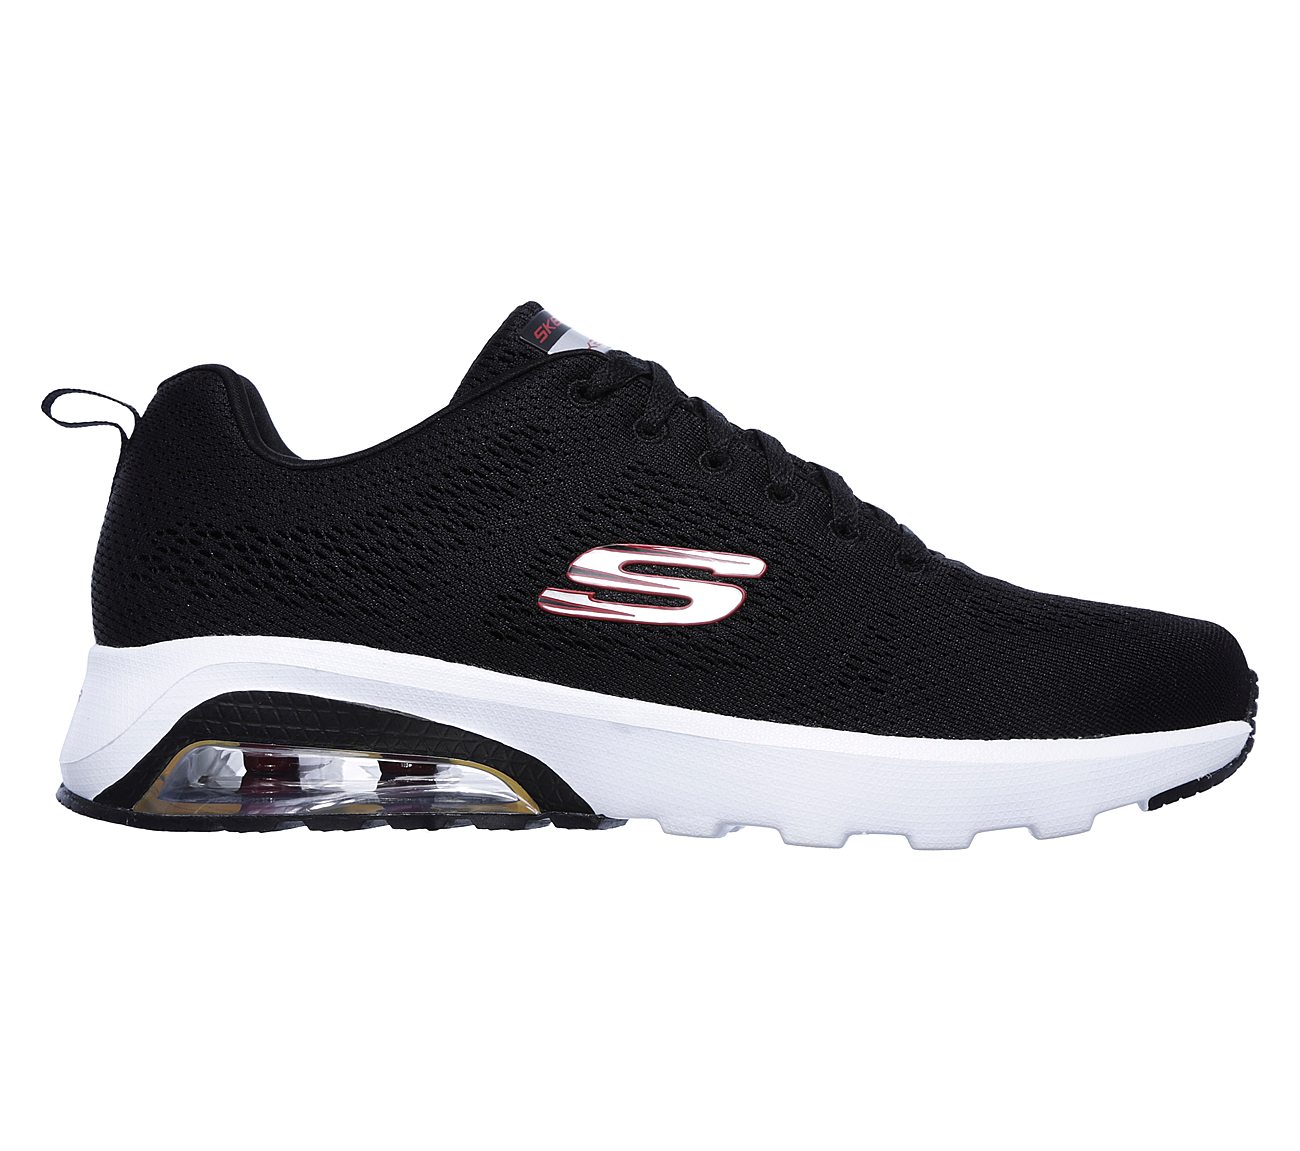 Buy SKECHERS Skech-Air Extreme - Natson Skech-Air Shoes